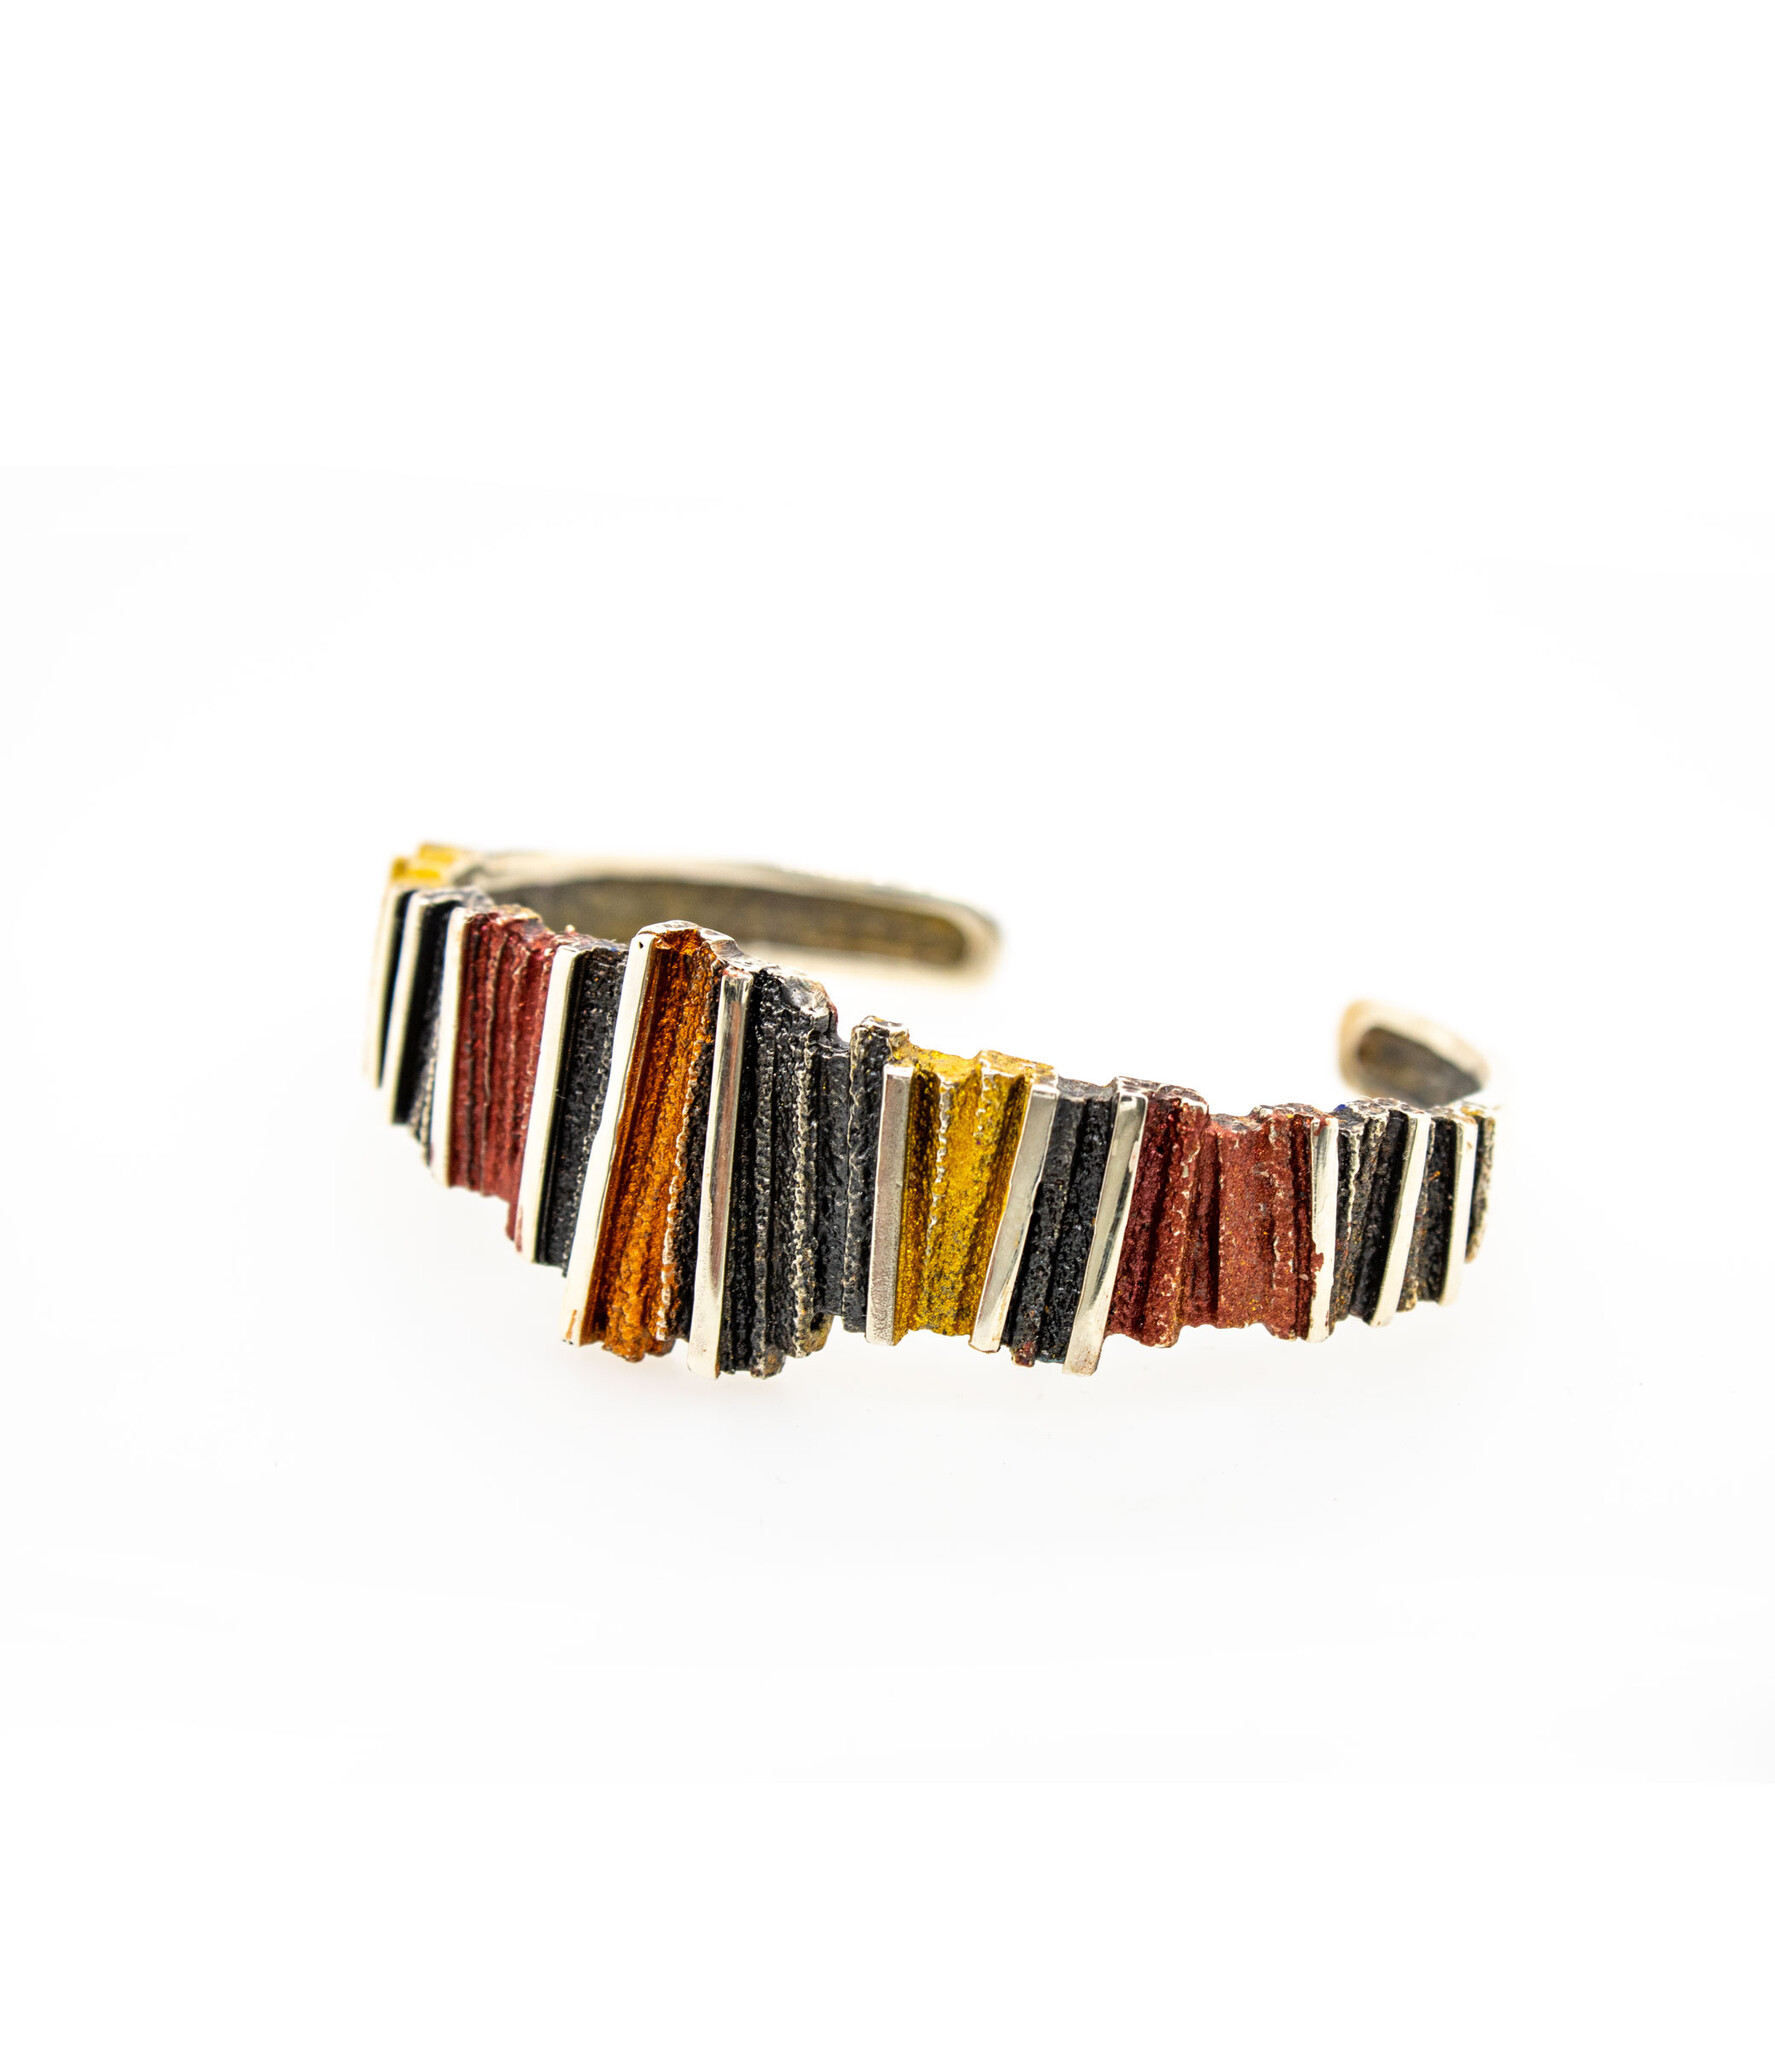 Arior Barcelona Bracelets: Masterpieces of Style and Elegance